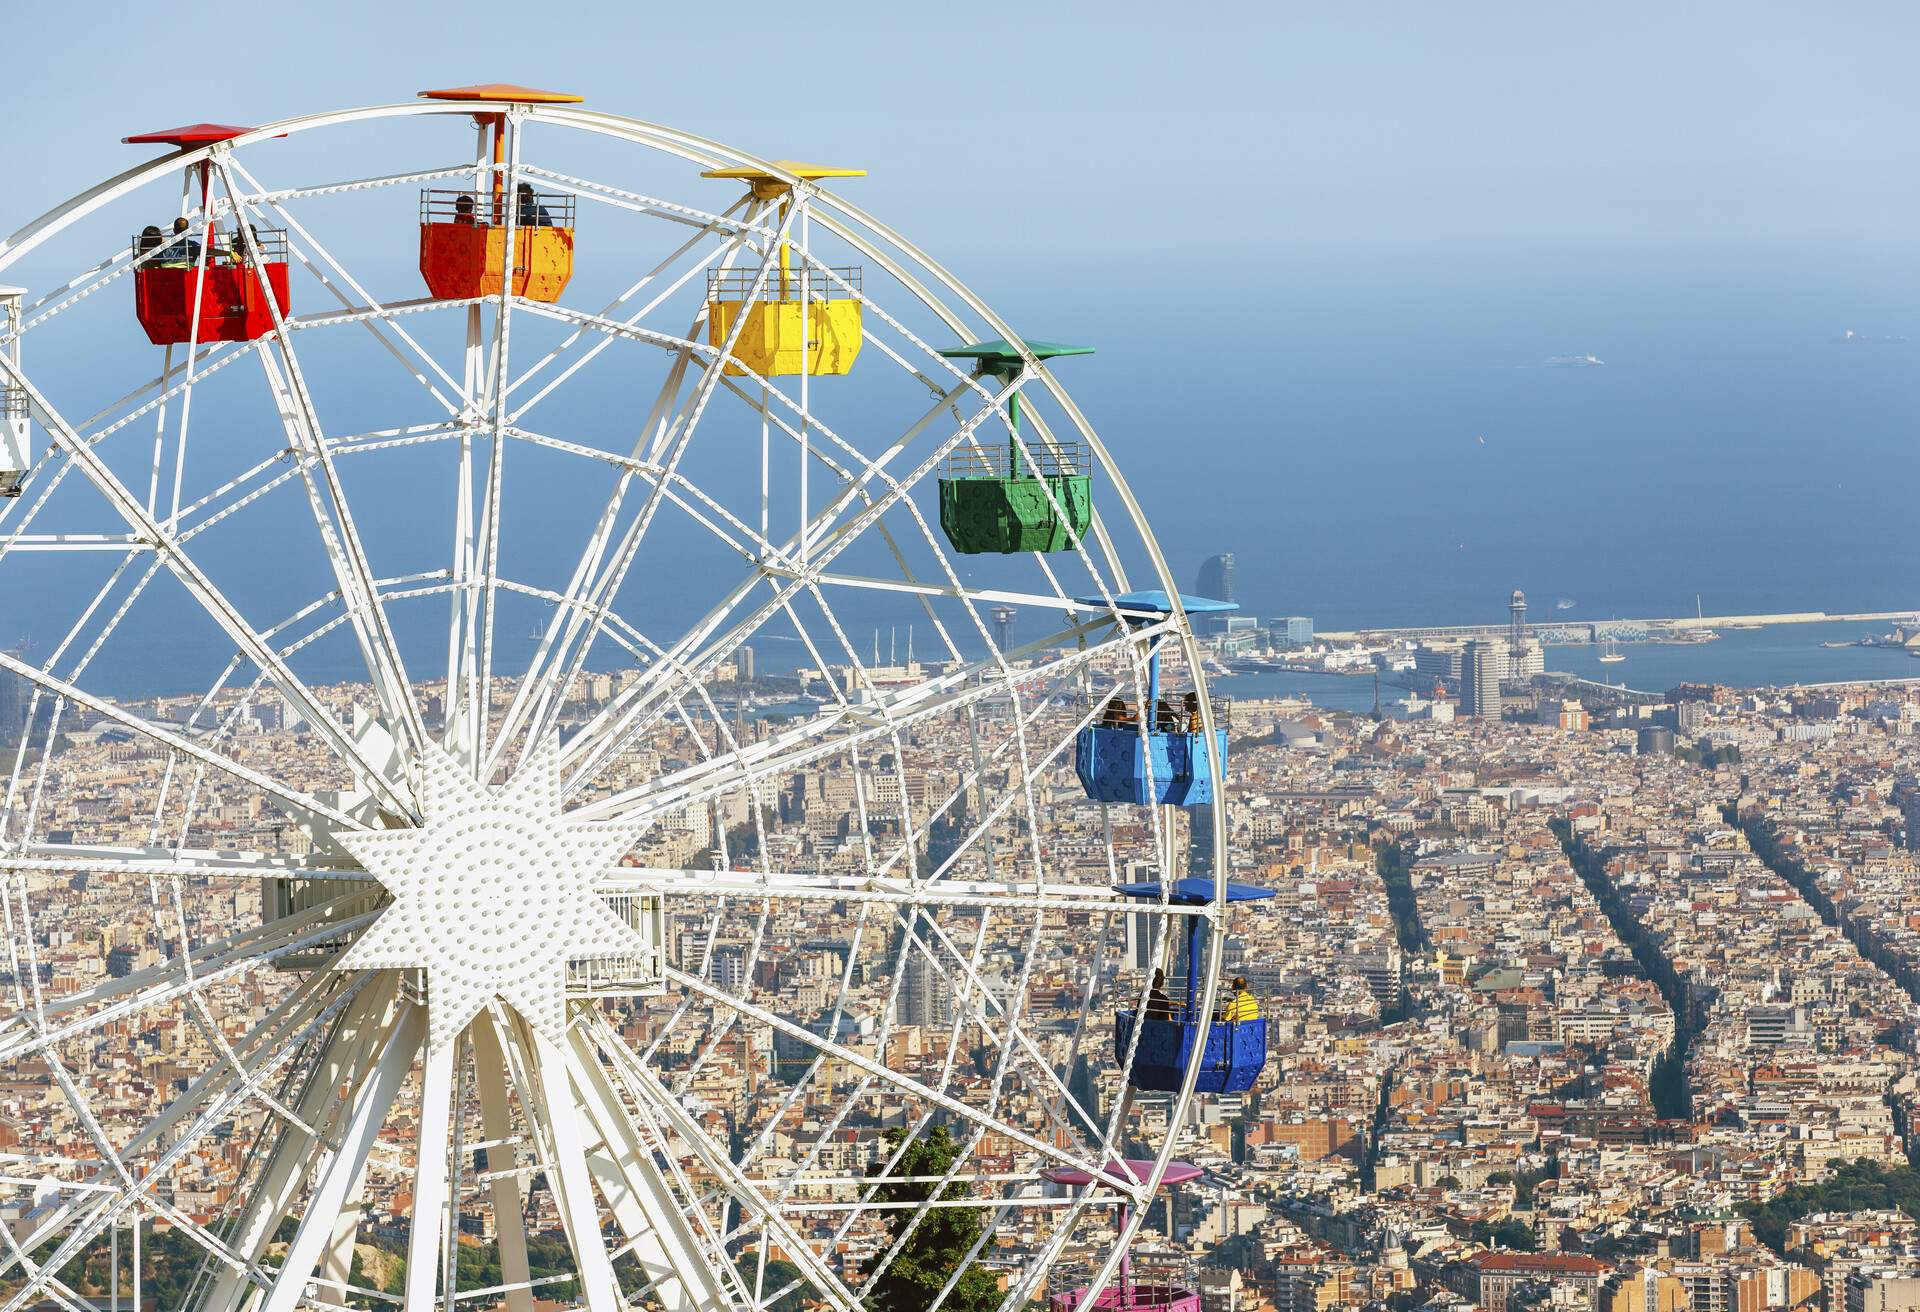 dest_spain_barcelona_tibidabo_gettyimages-983656062_universal_within-usage-period_57518